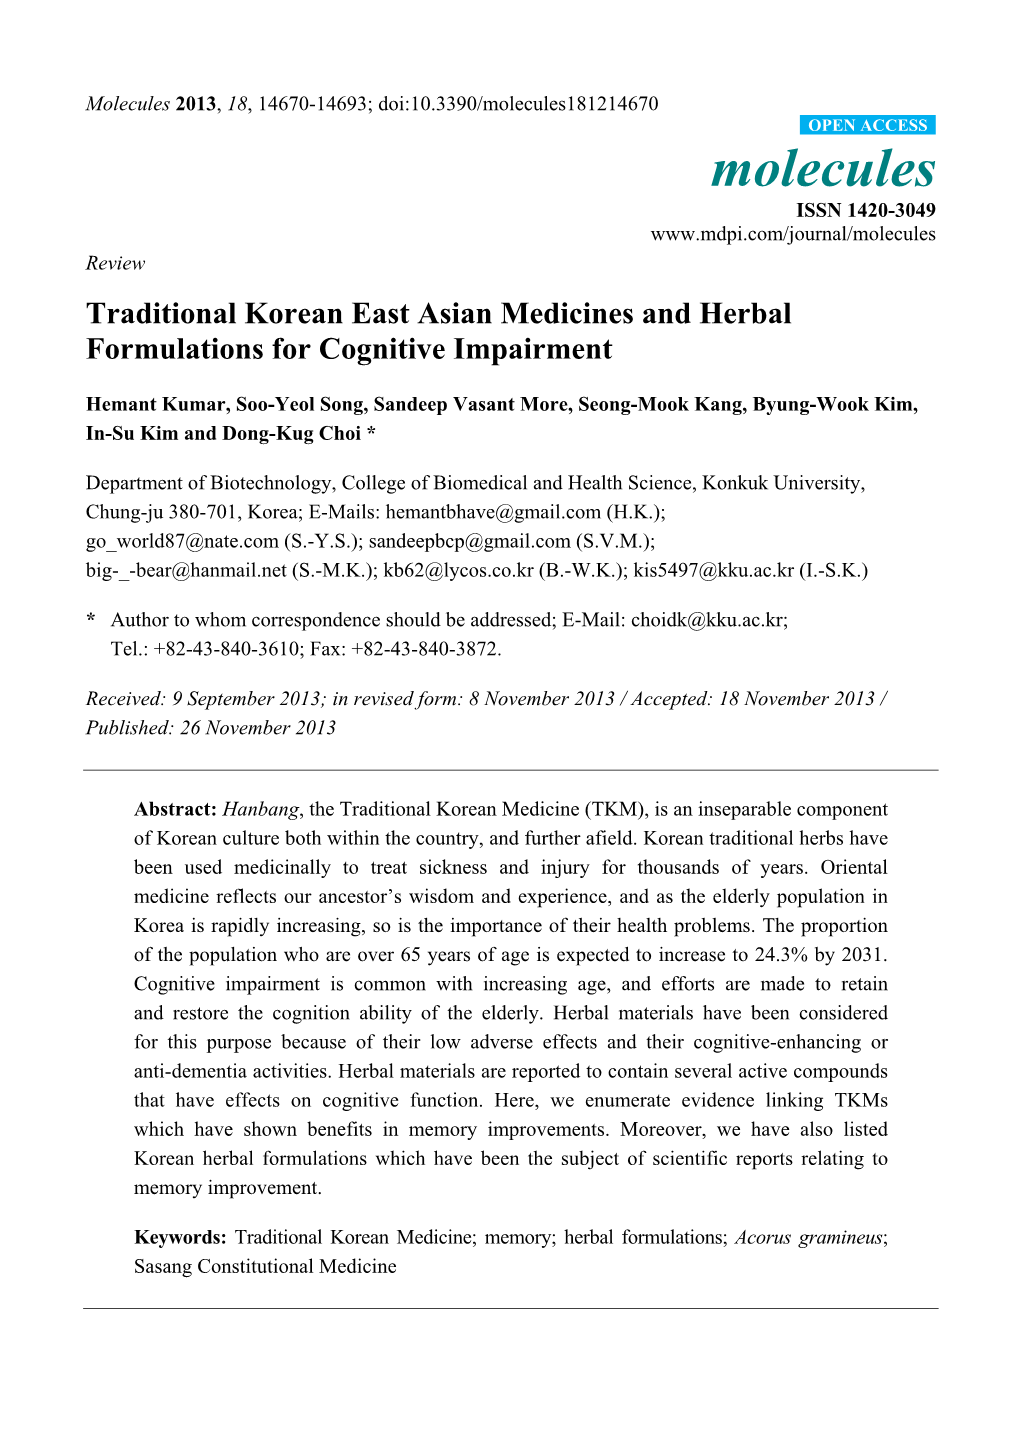 Traditional Korean East Asian Medicines and Herbal Formulations for Cognitive Impairment